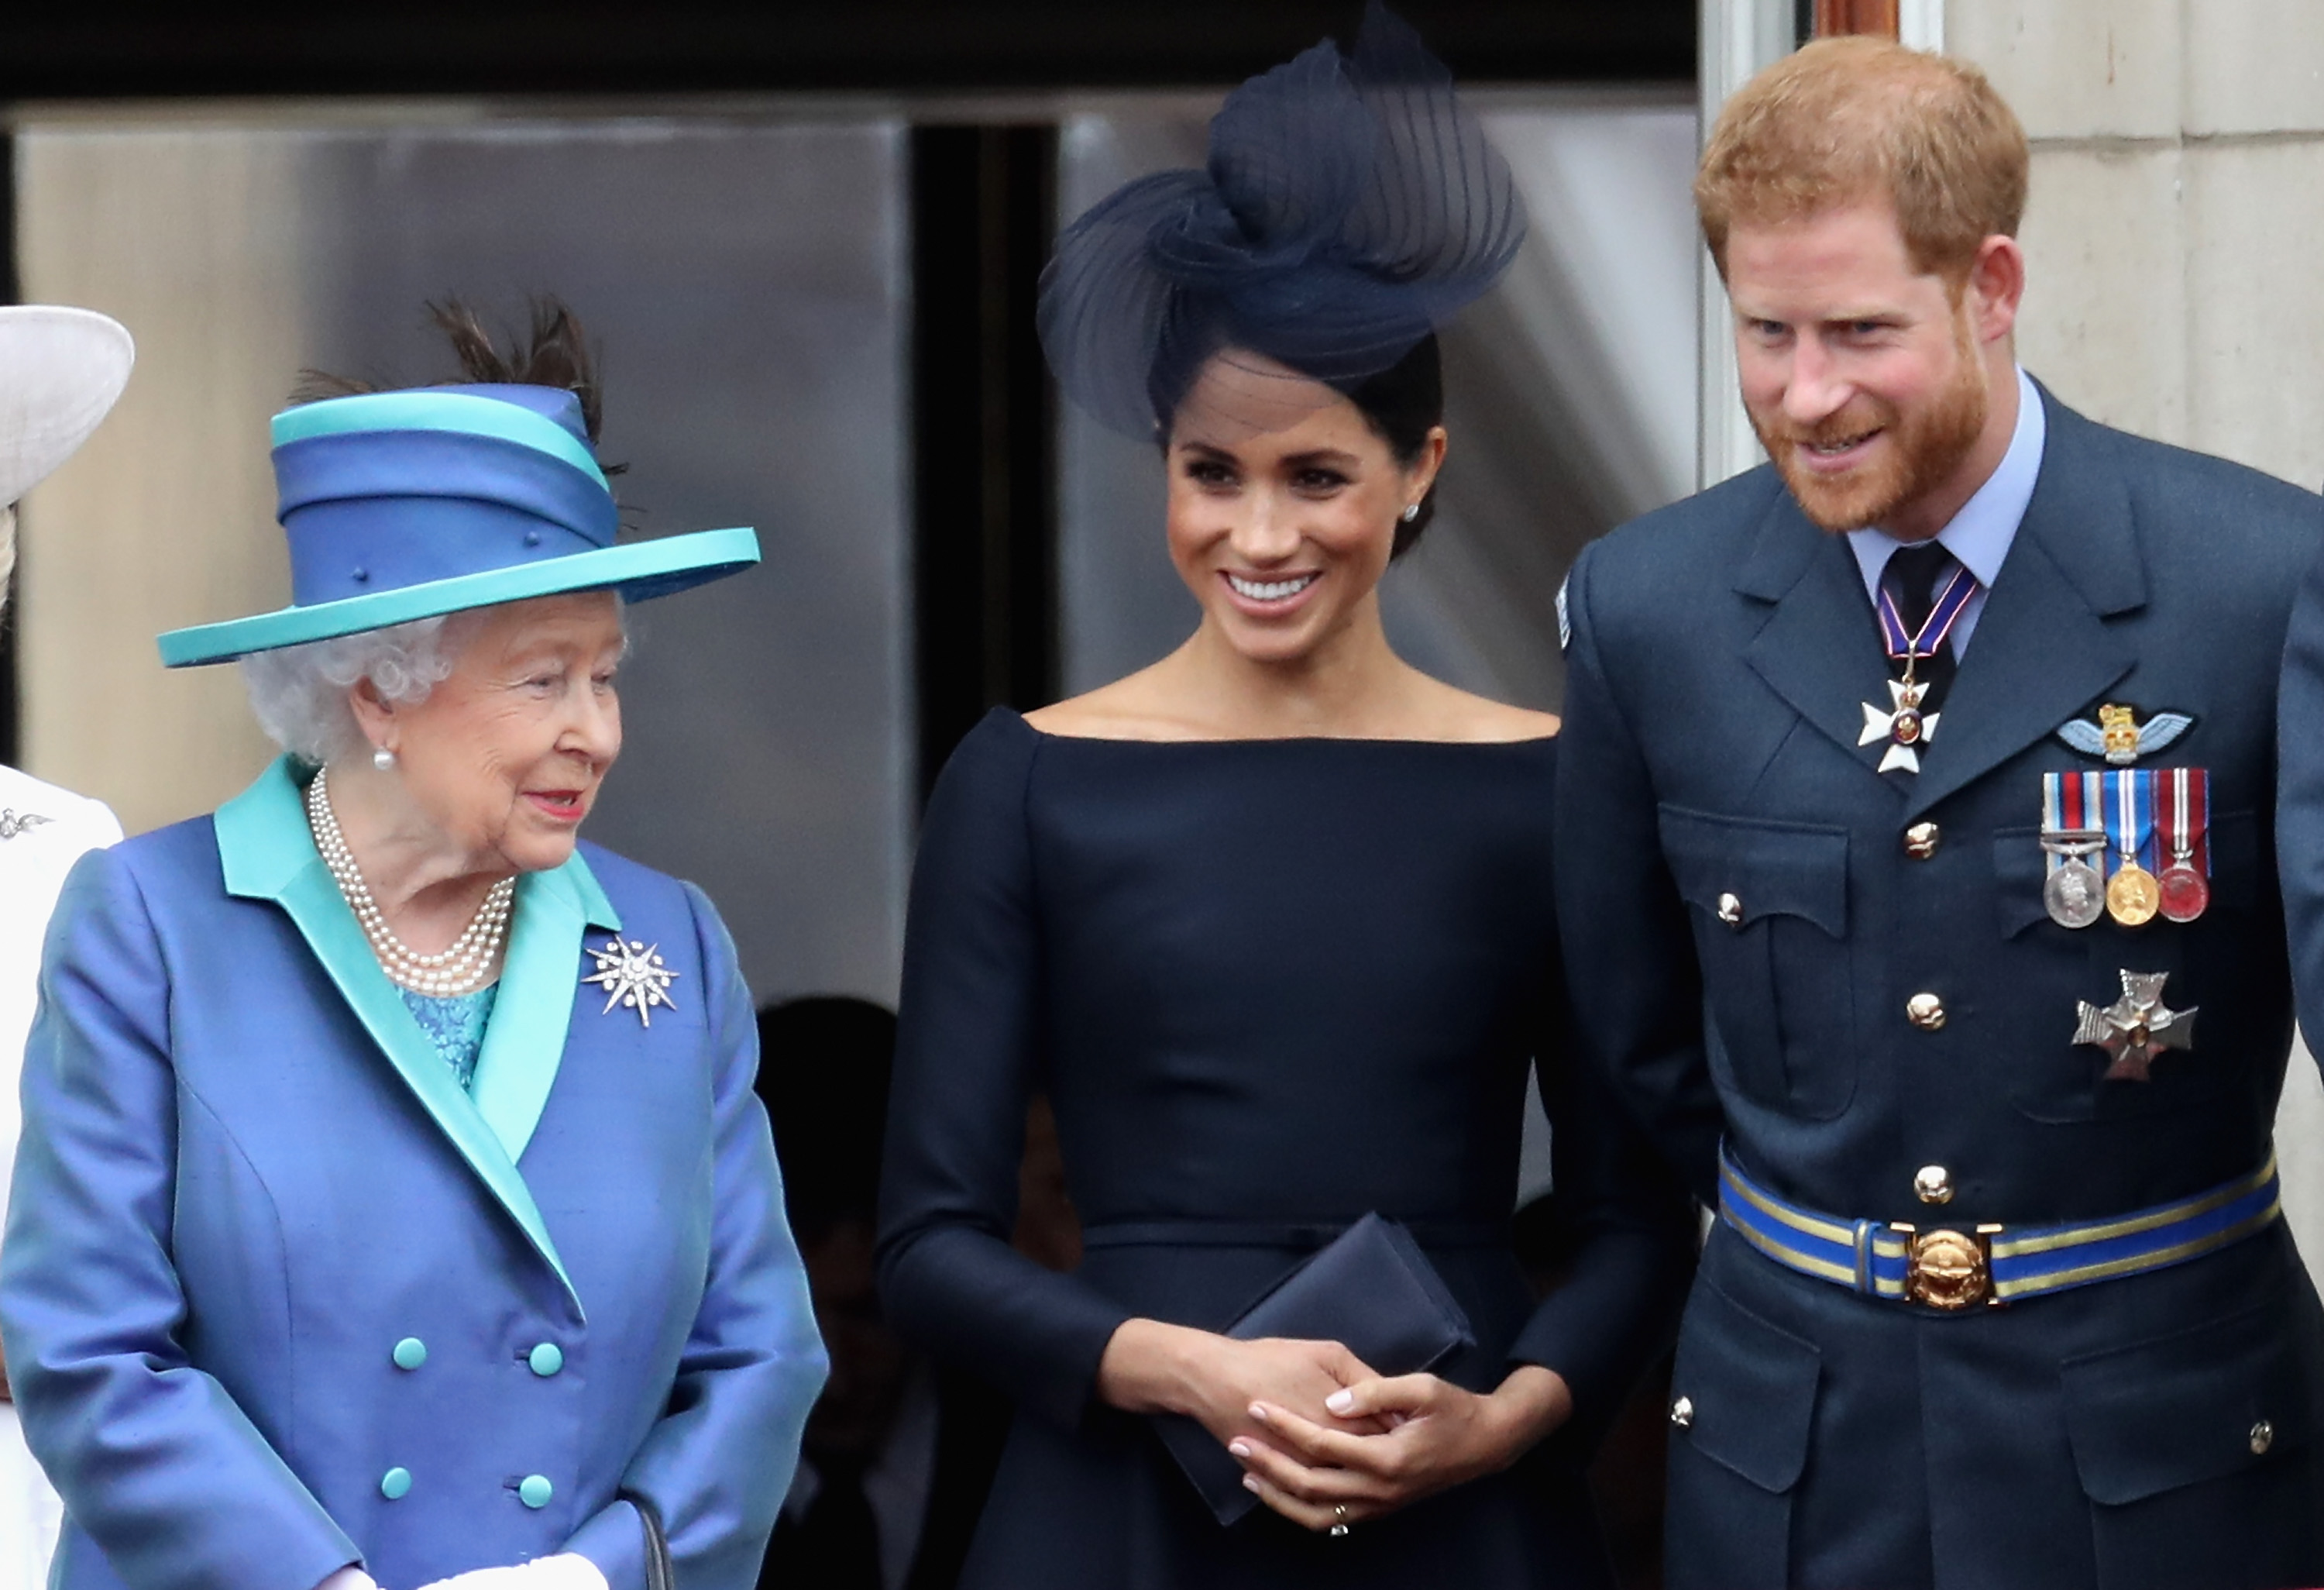 Queen Elizabeth Will Reportedly Have Custody of Prince Harry and Meghan Meghan's Kids